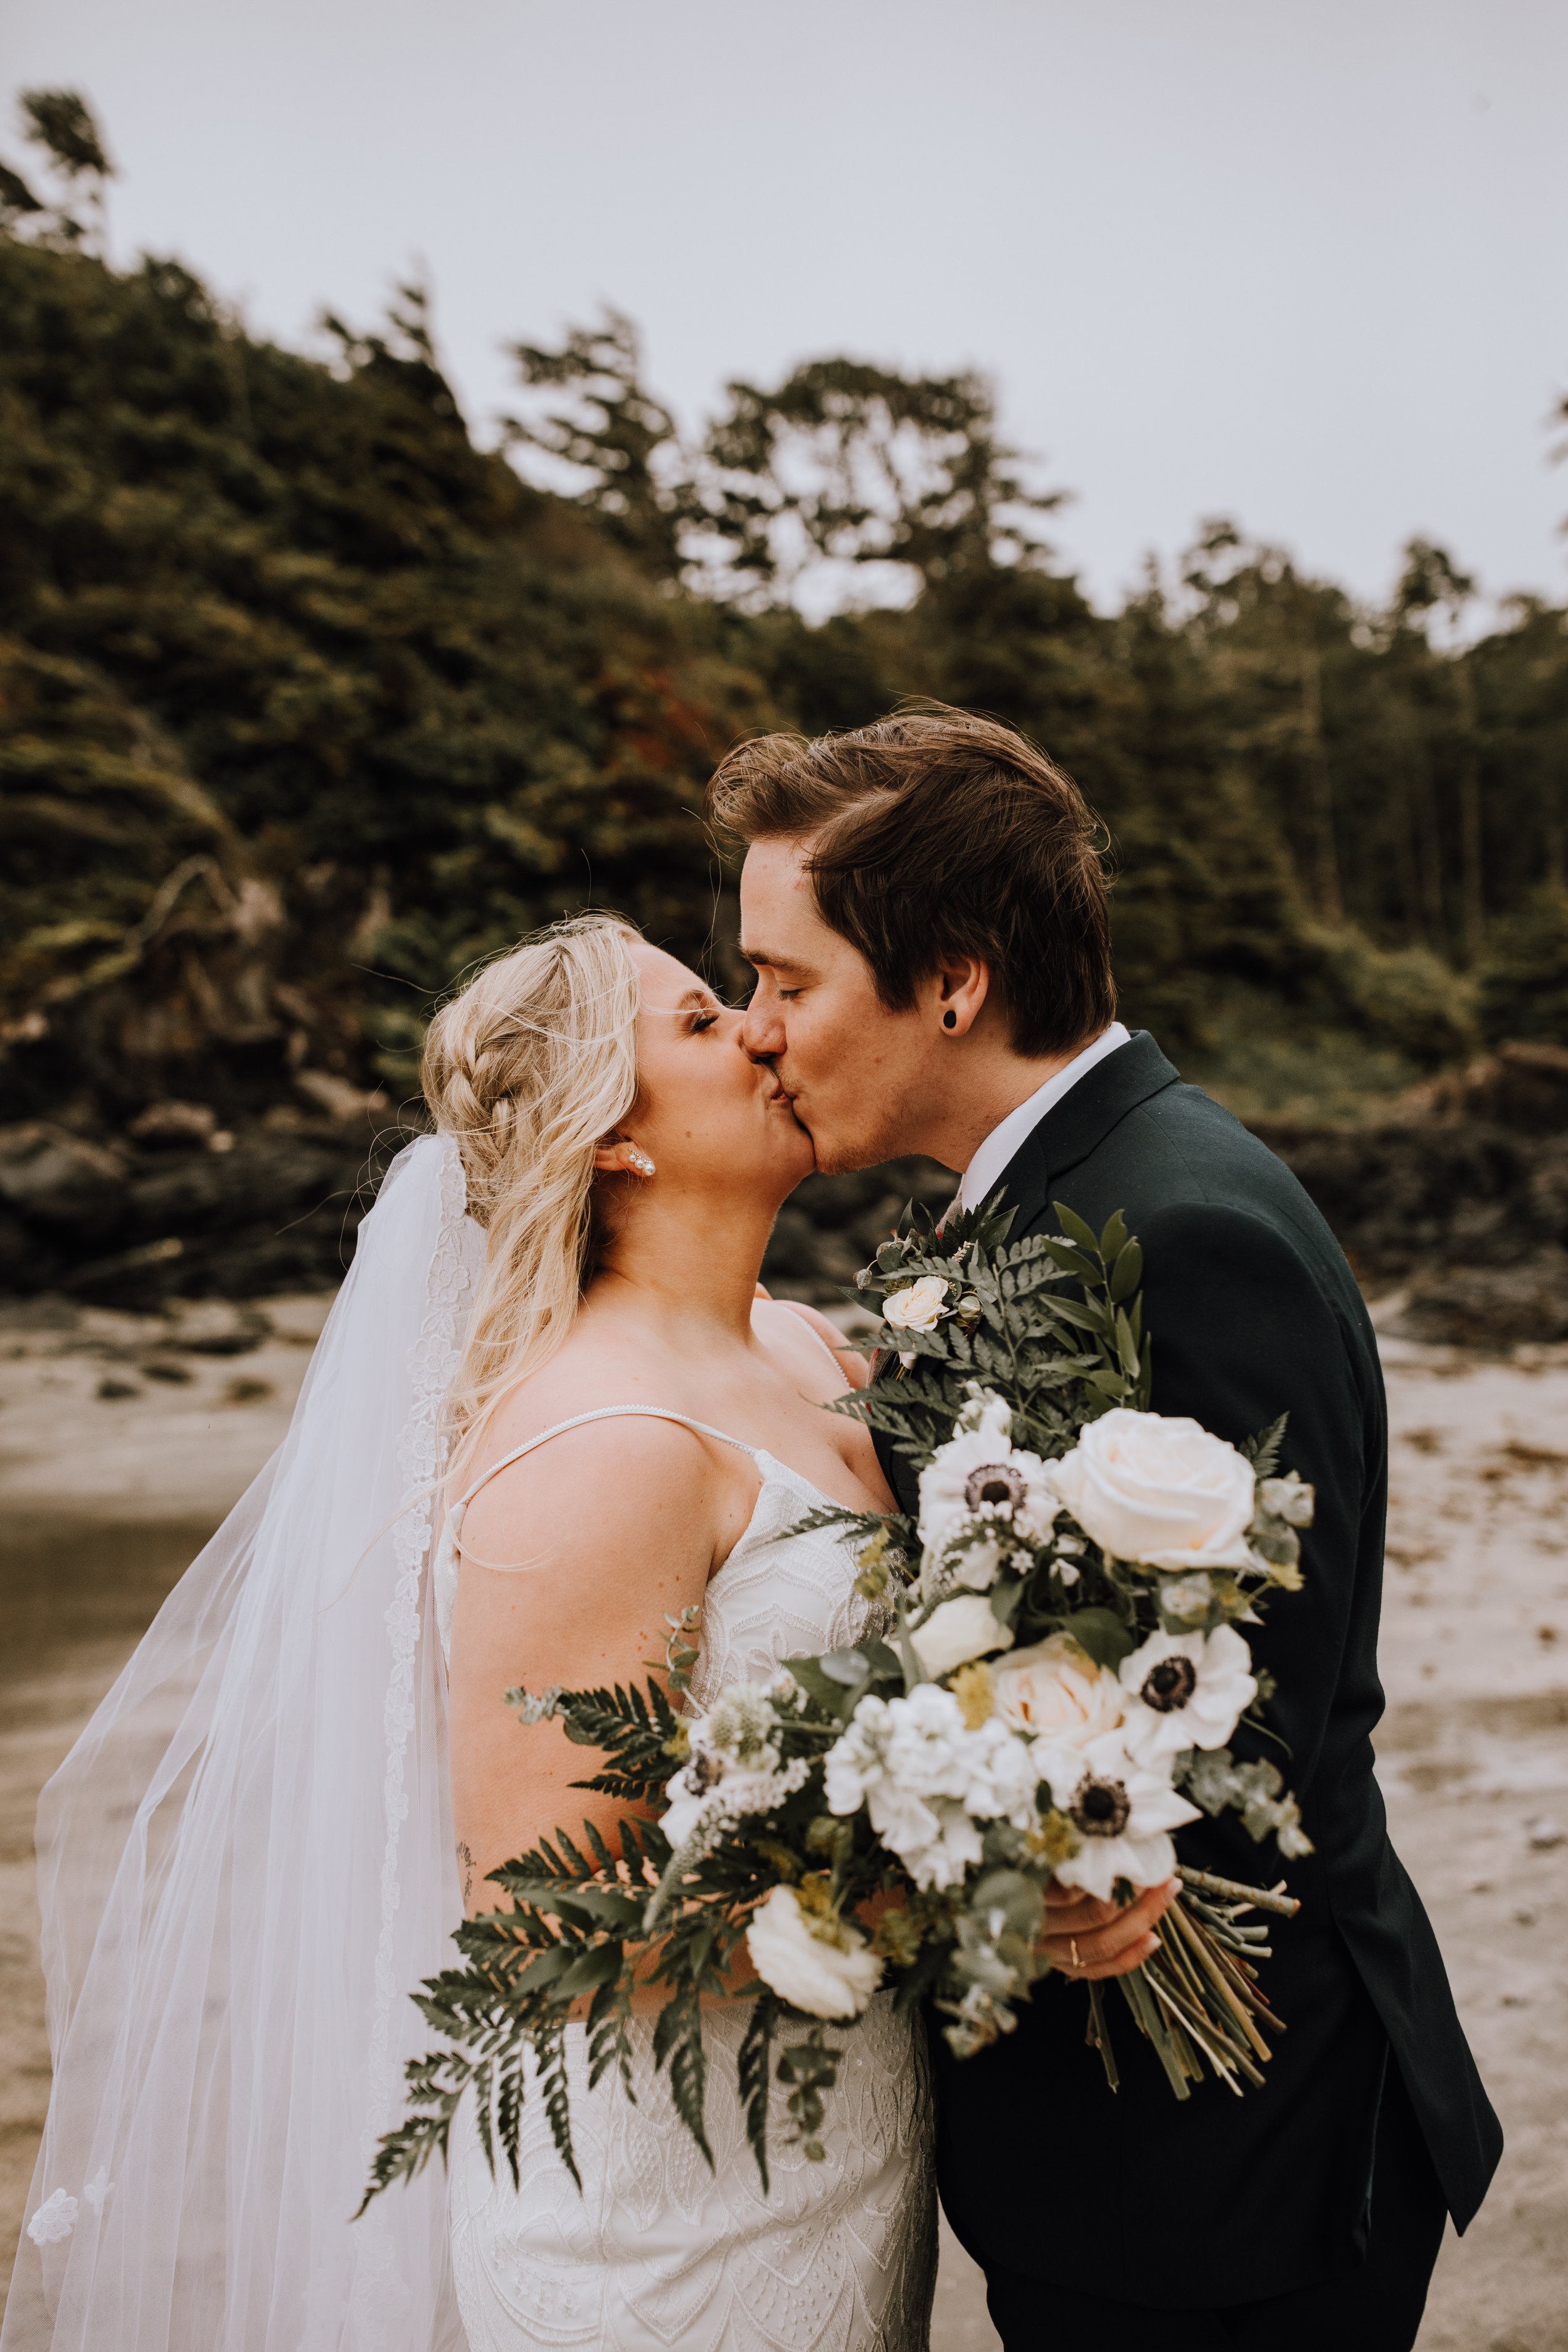 Brooke and Devin Wedding - Tin Wis Best Western Tofino Vancouver Island British Columbia - Elyse Anna Photography-3883.jpg